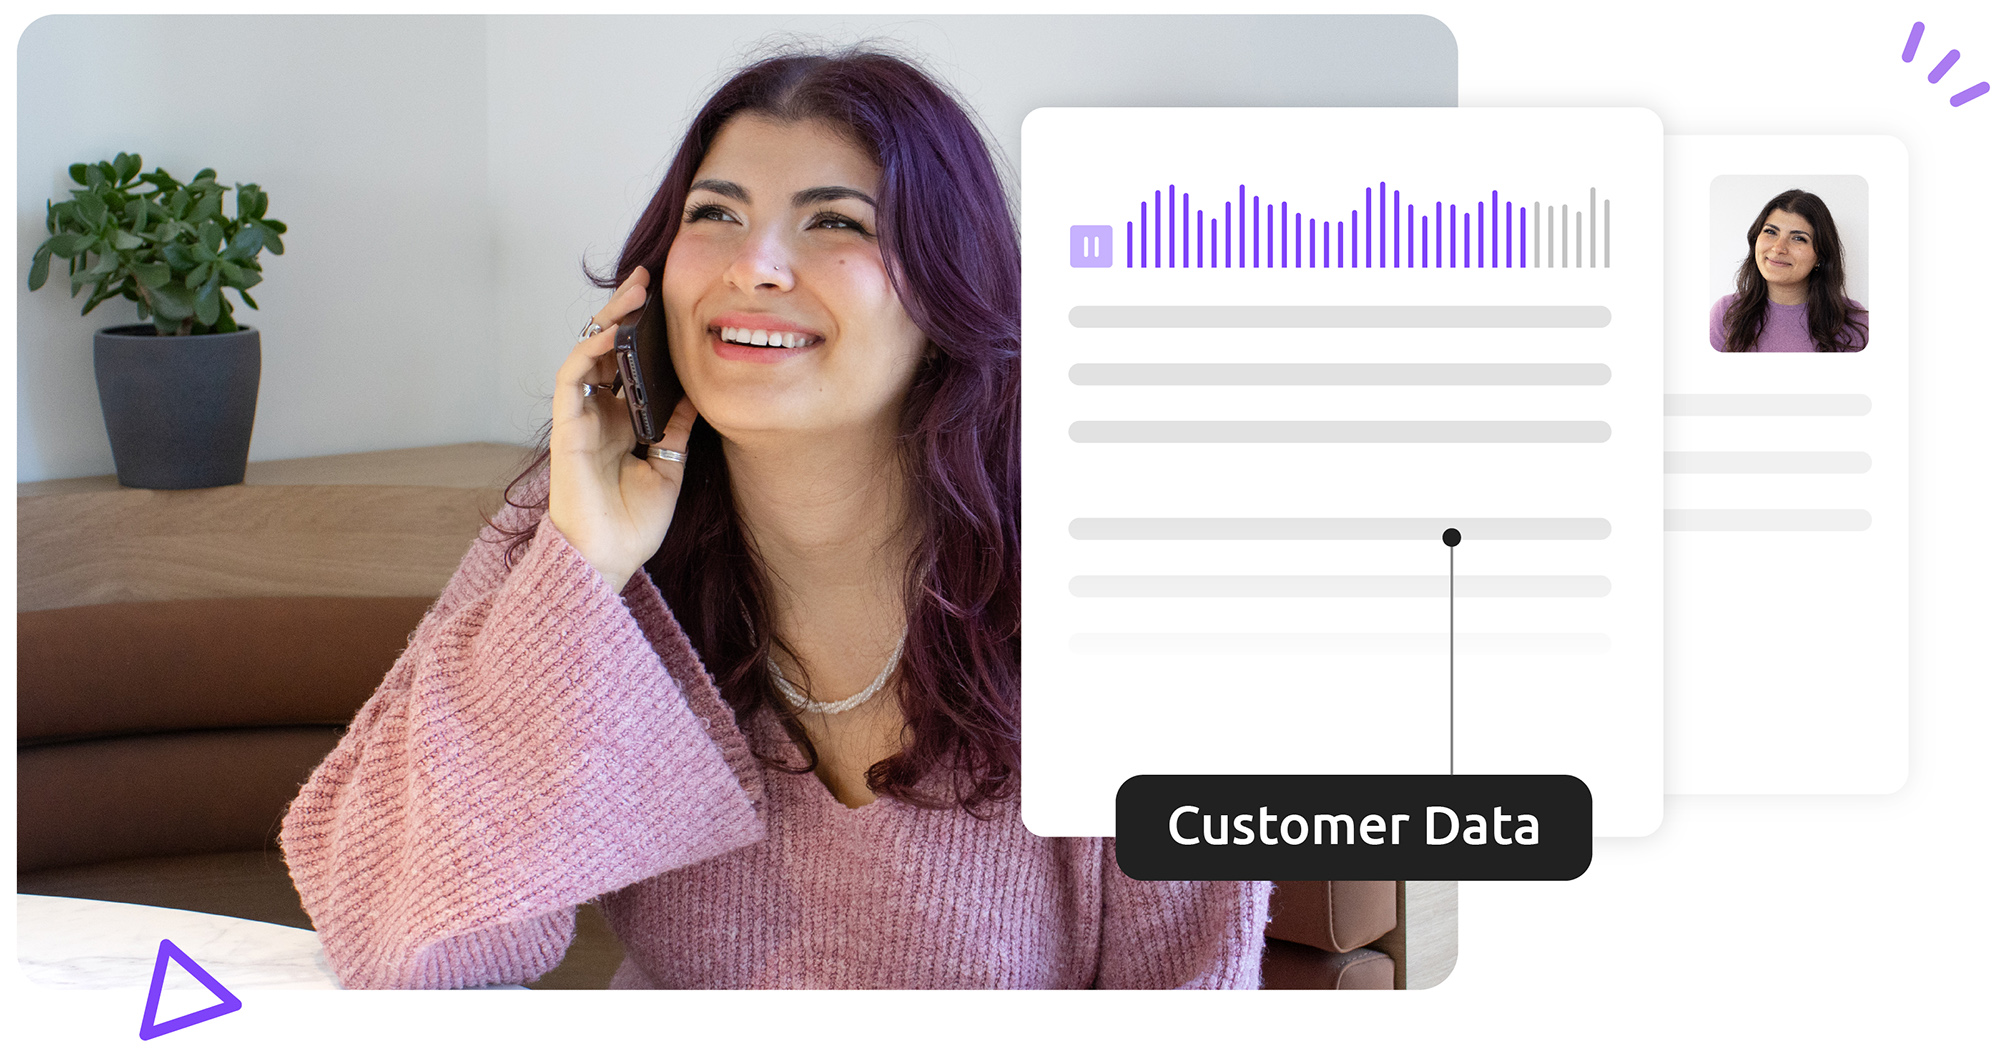 Data collection from voice for better customer understanding